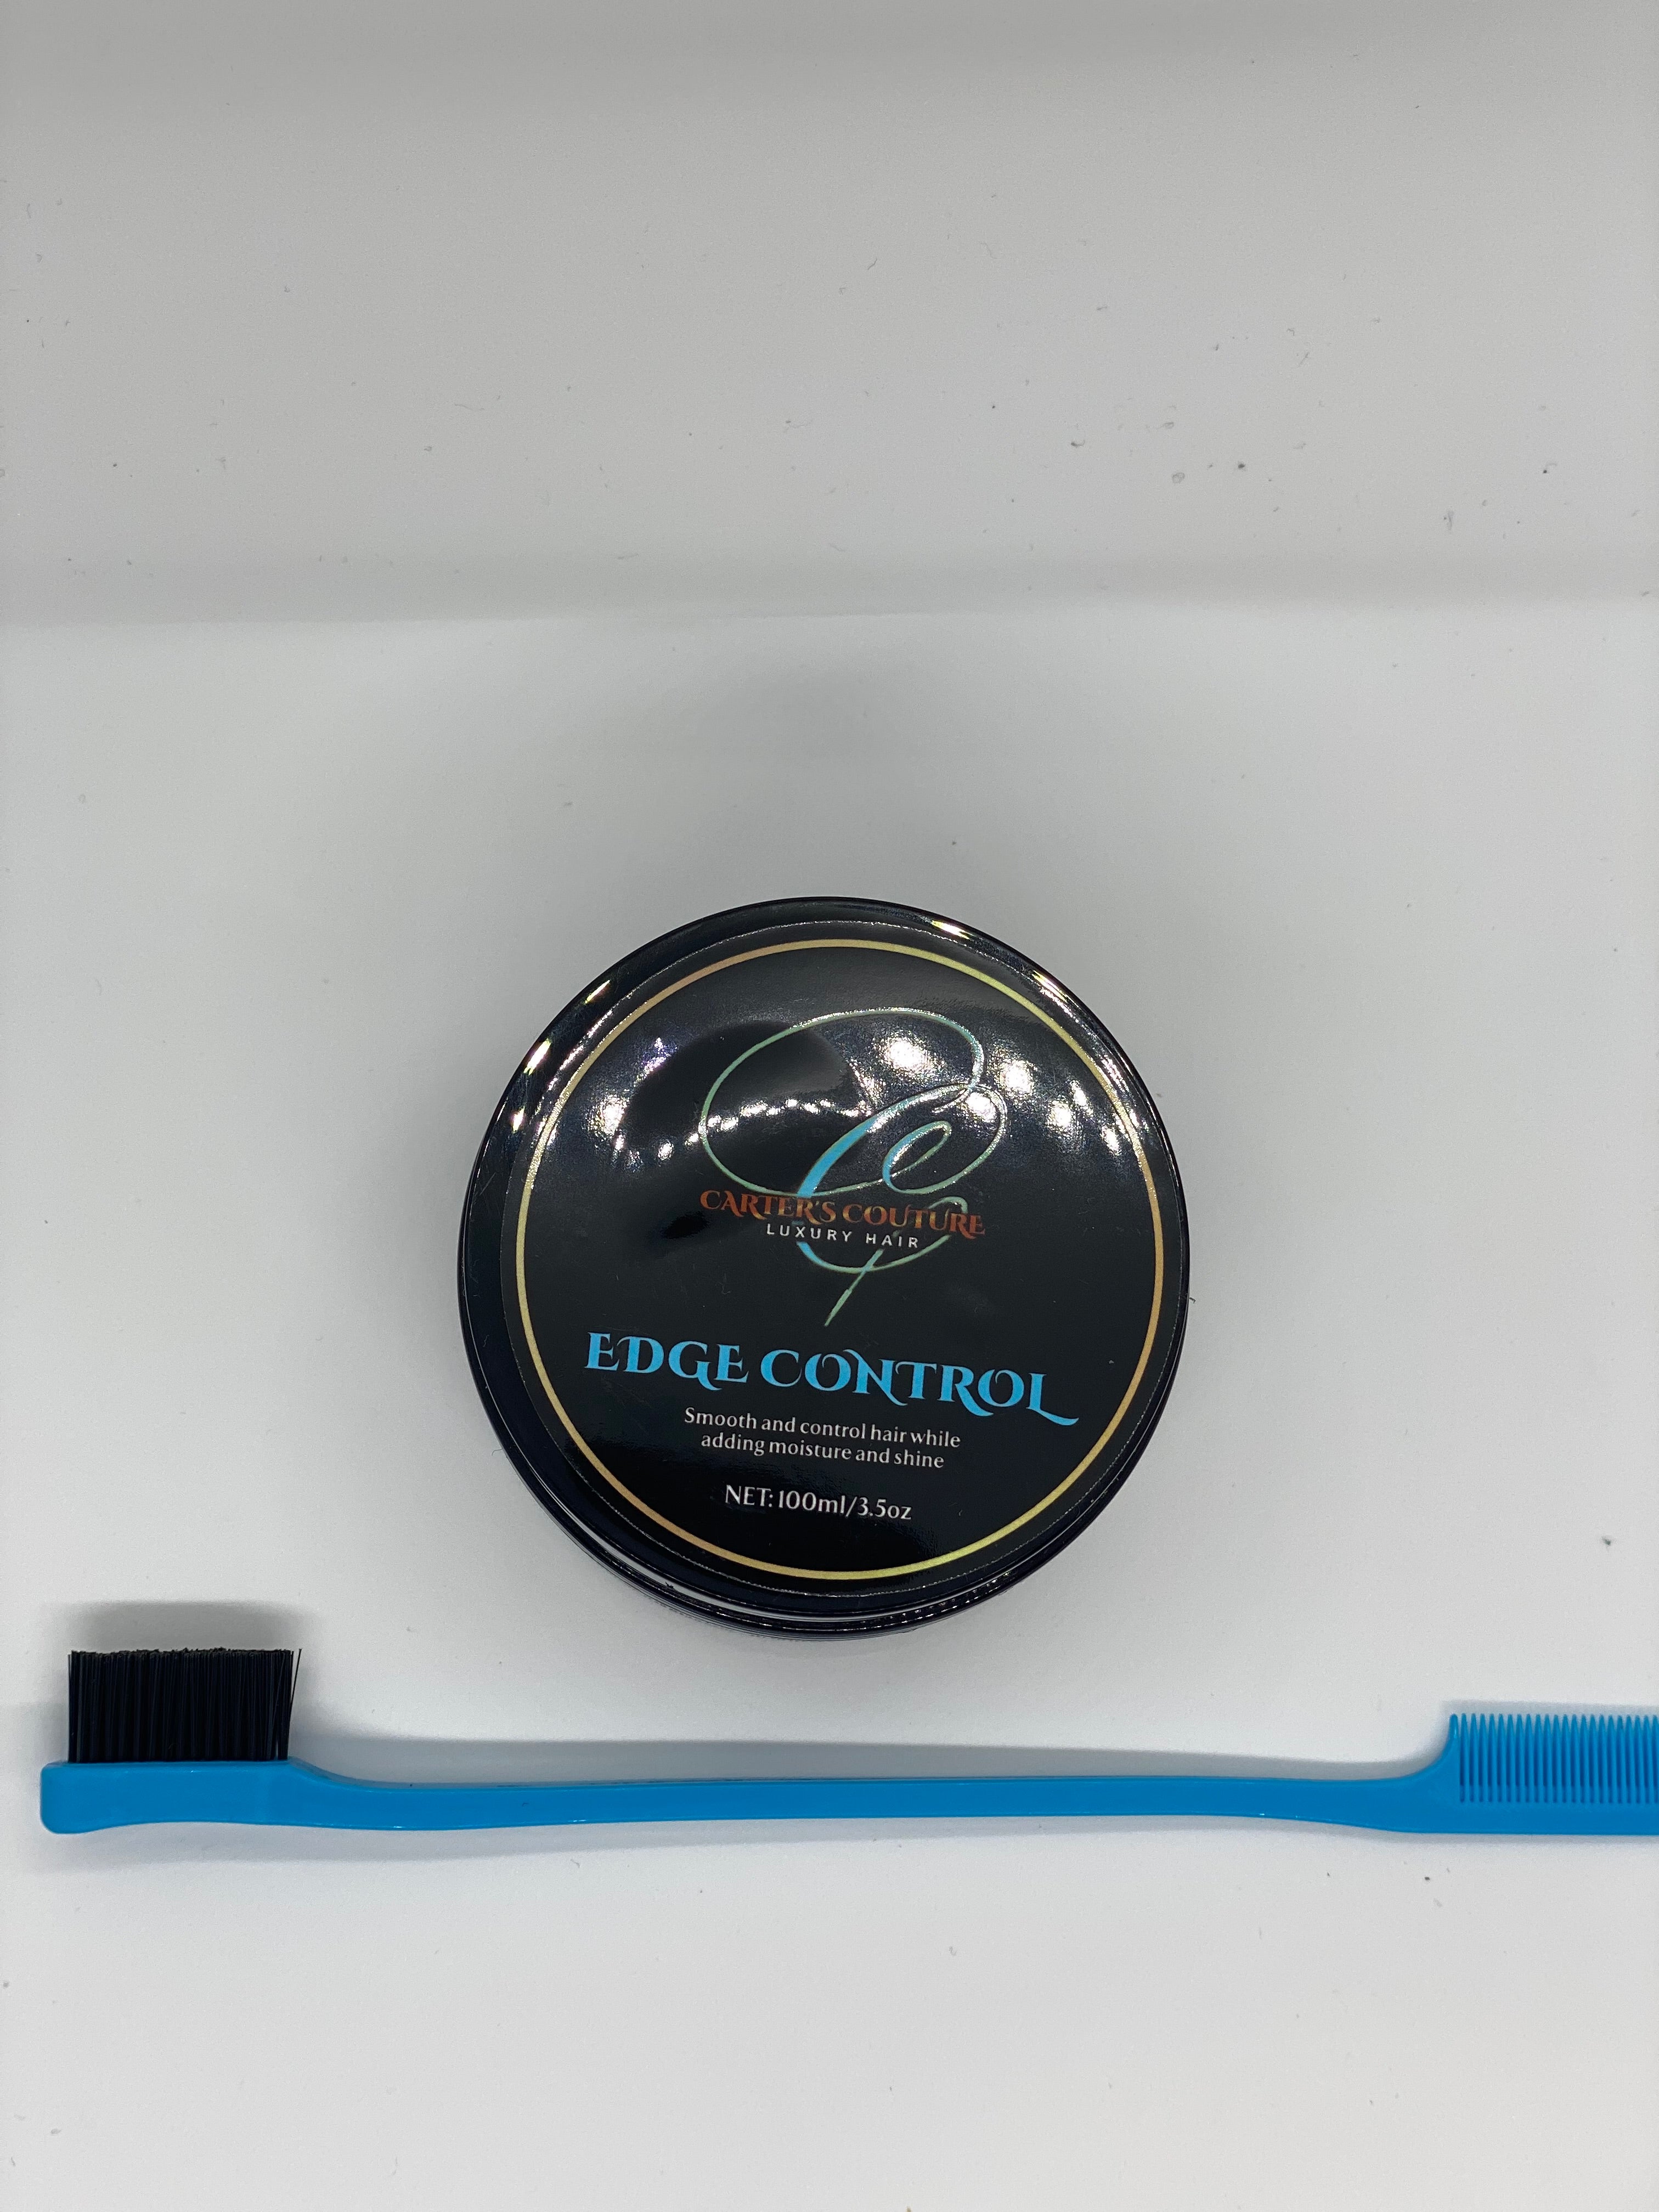 Carter’s Couture Luxury Edge Control